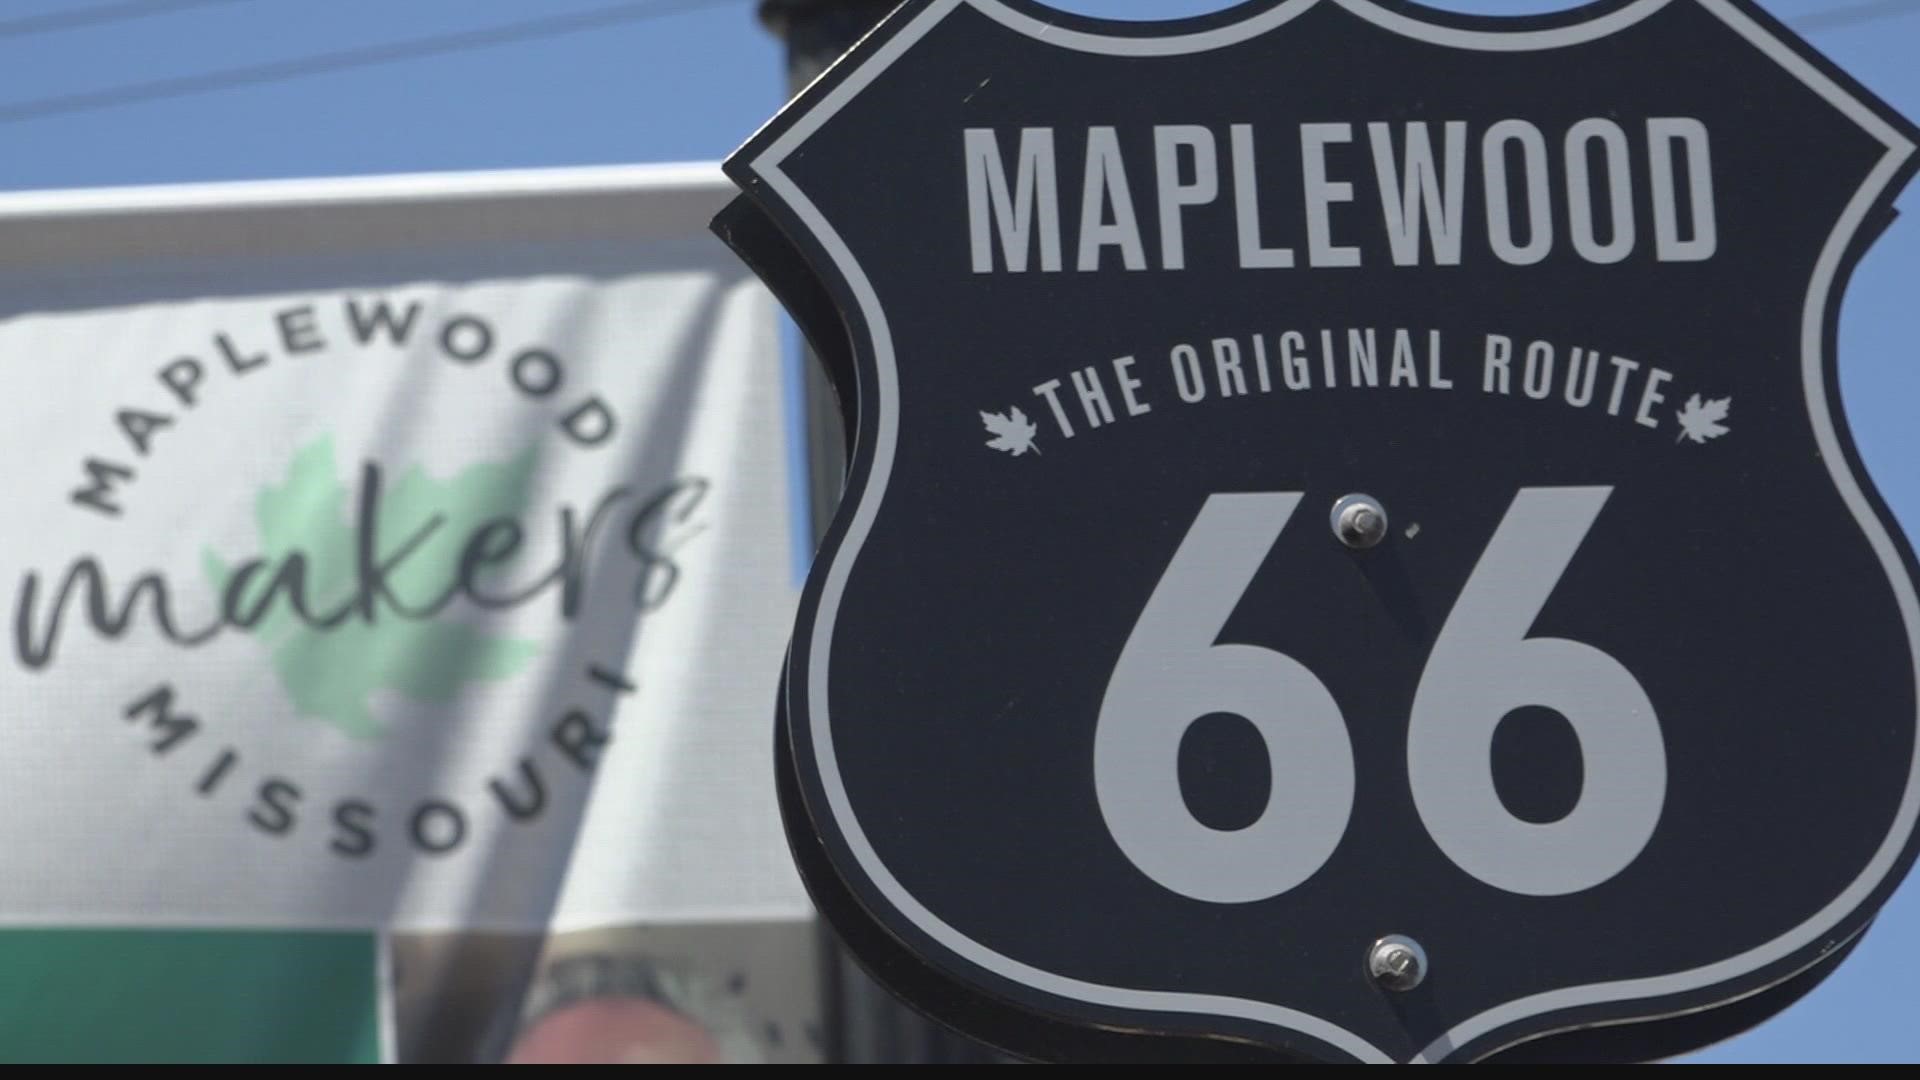 Route 66 is no longer the drive of choice for most travelers. But on the road through Maplewood, they continue to get their kicks.